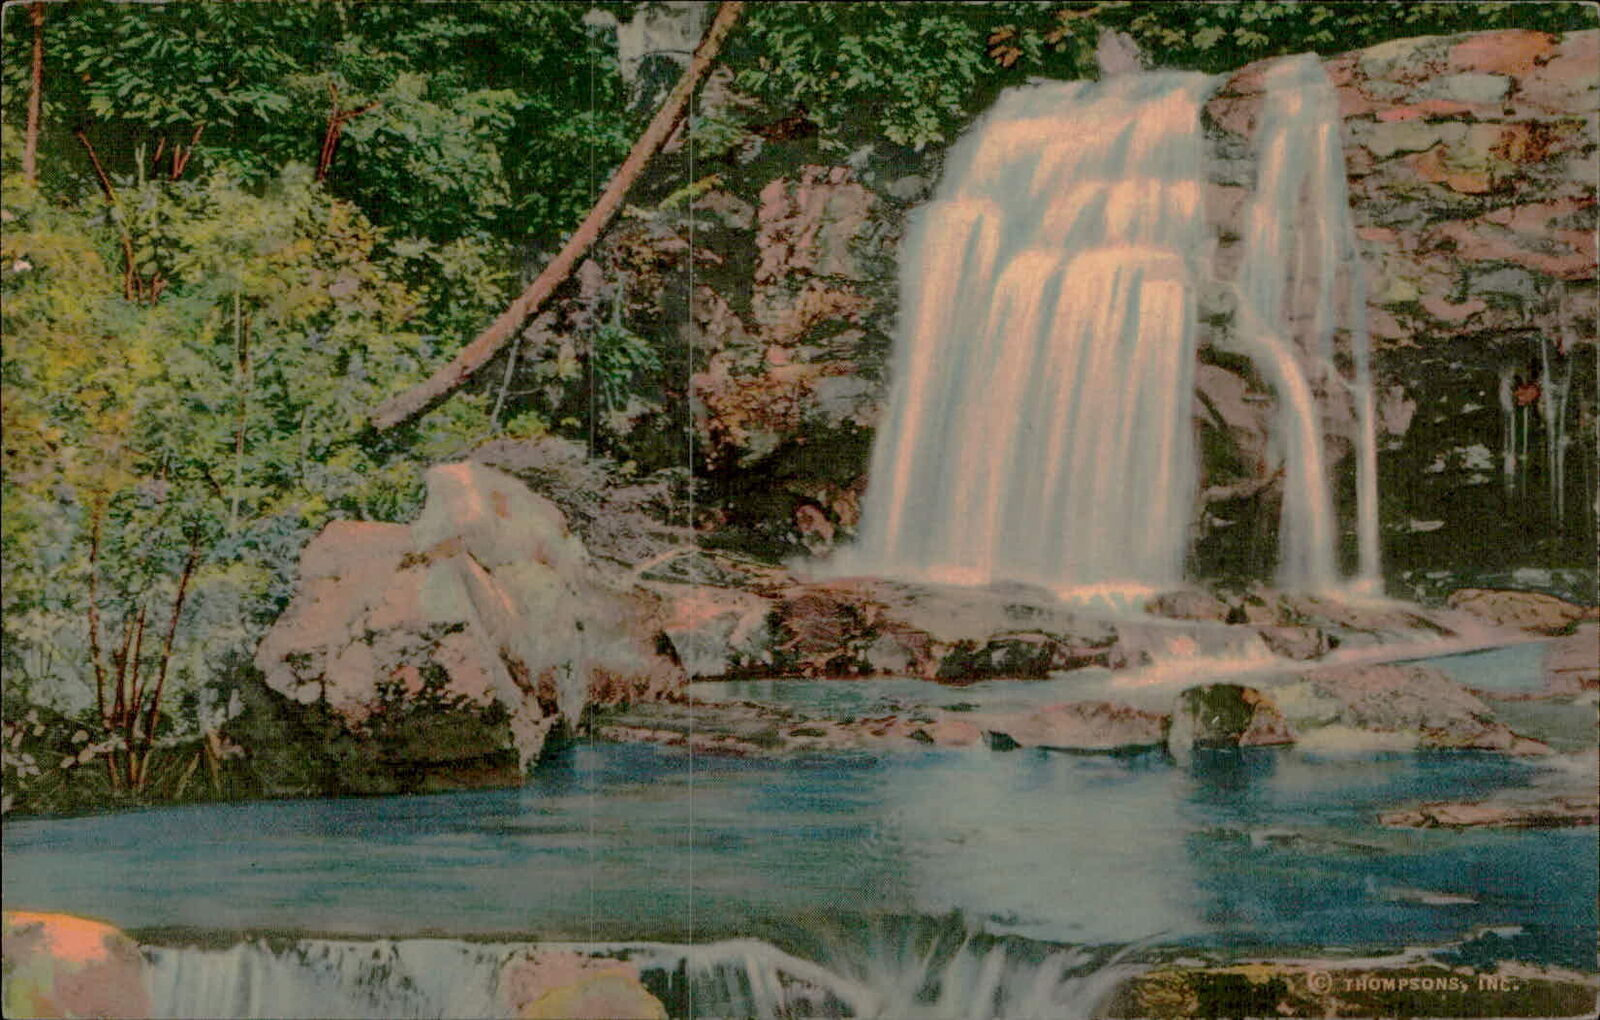 Postcard: BRIDAL VEIL FALLS, IN THE GREAT SMOKY MOUNTAINS